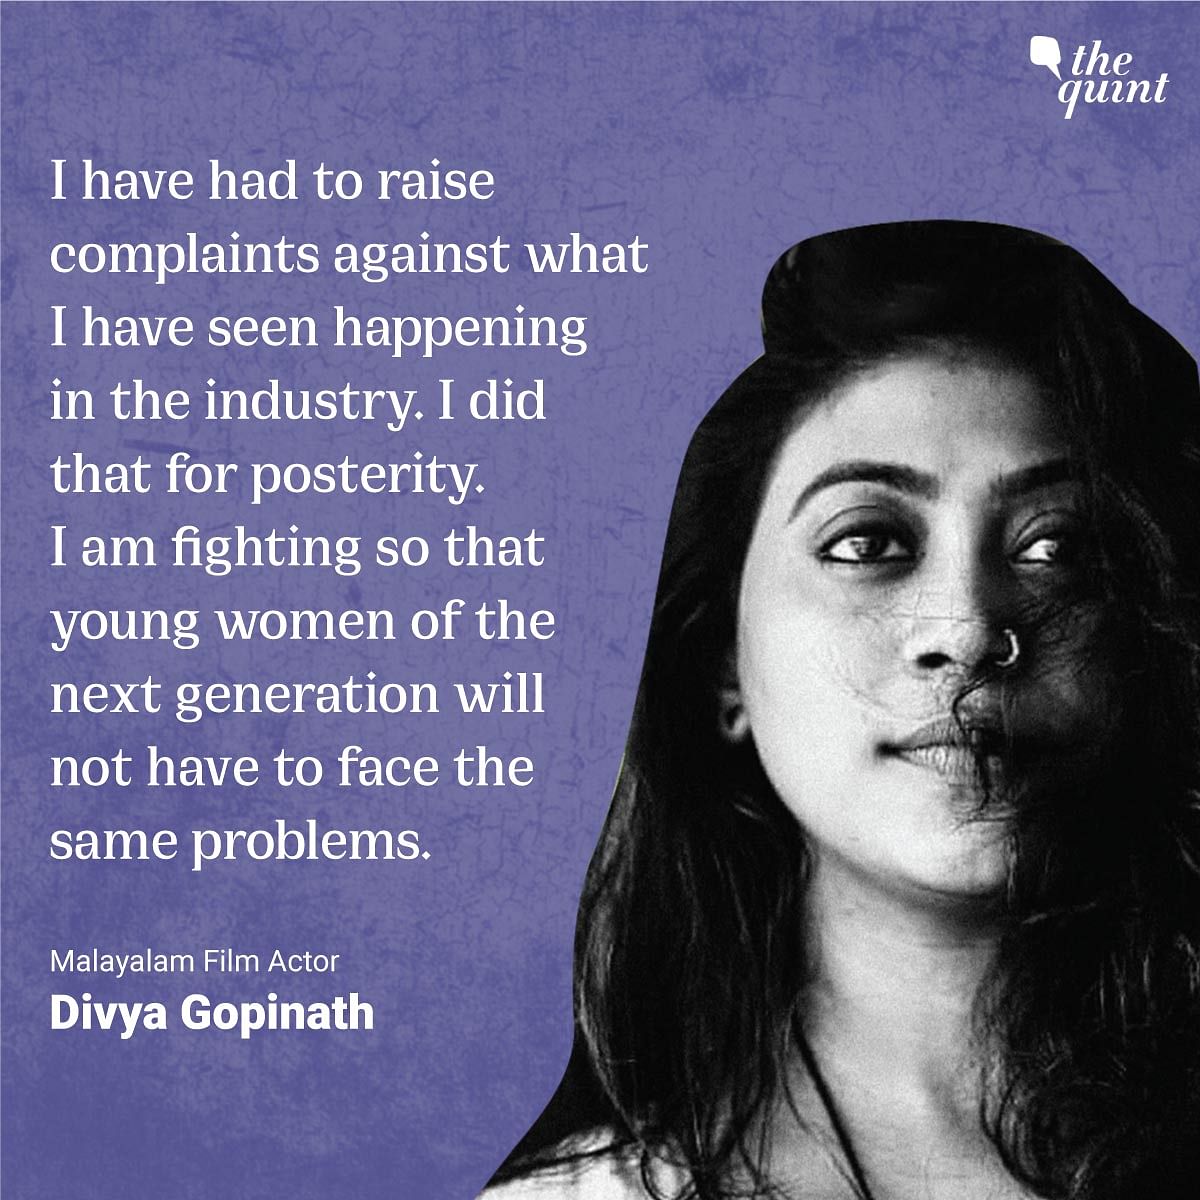 Divya Gopinath says she is speaking up to make Hema Committee reveal its findings and recommendations.